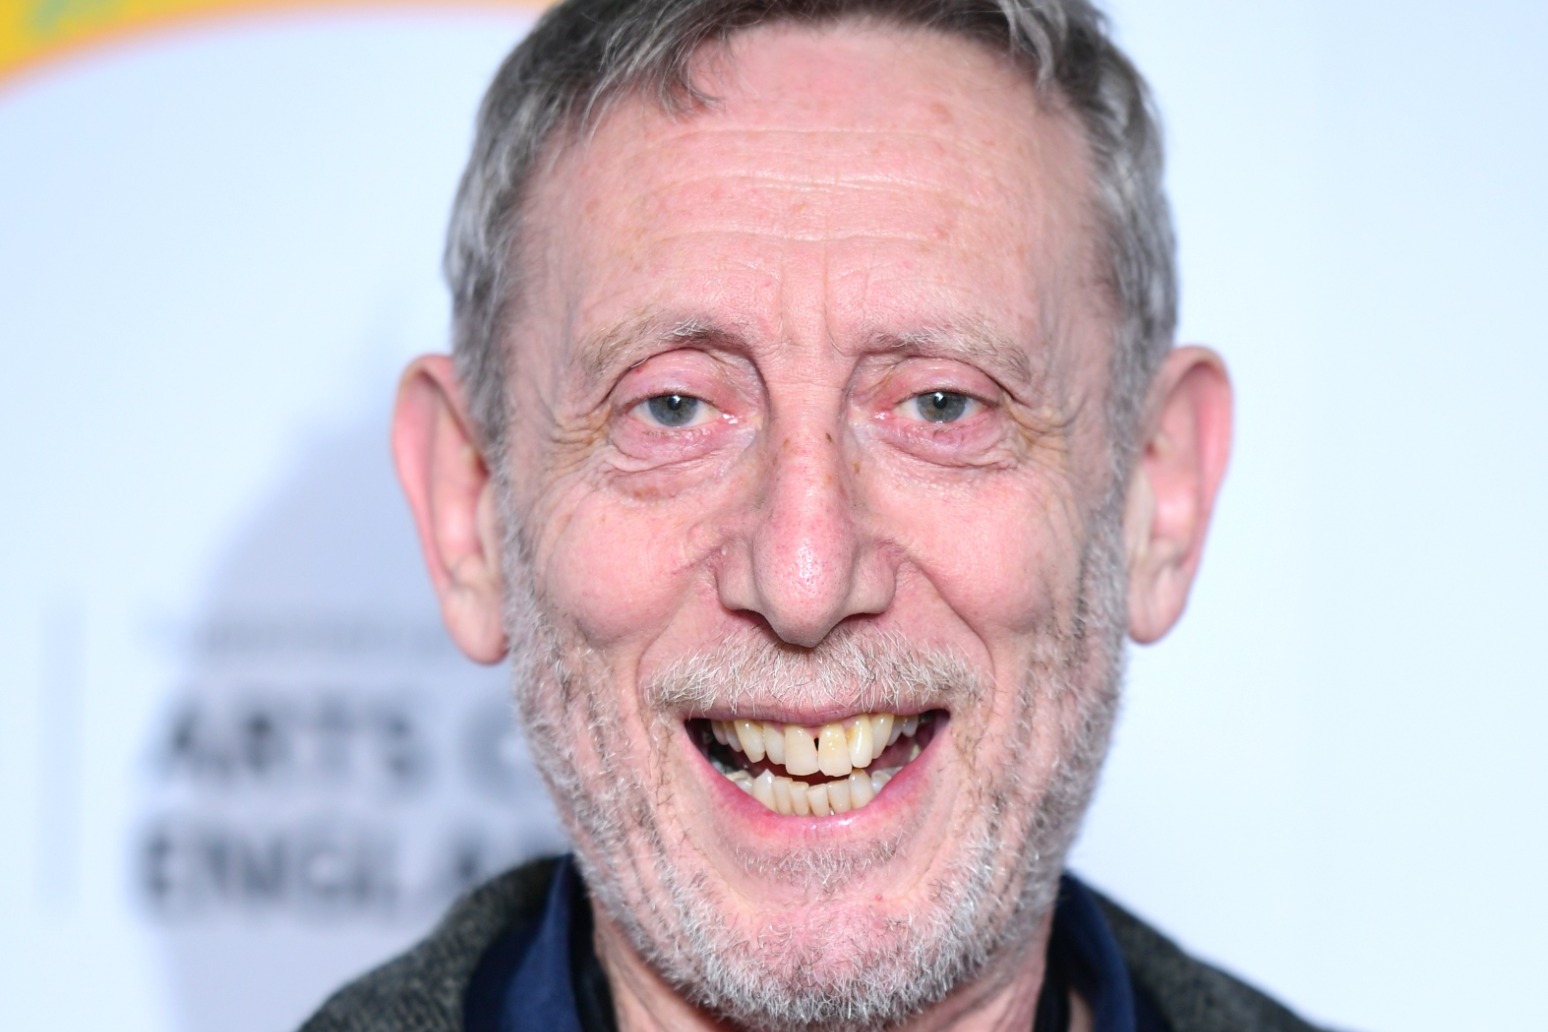 Michael Rosen emotional as he meets nurse who cared for him during Covid coma 